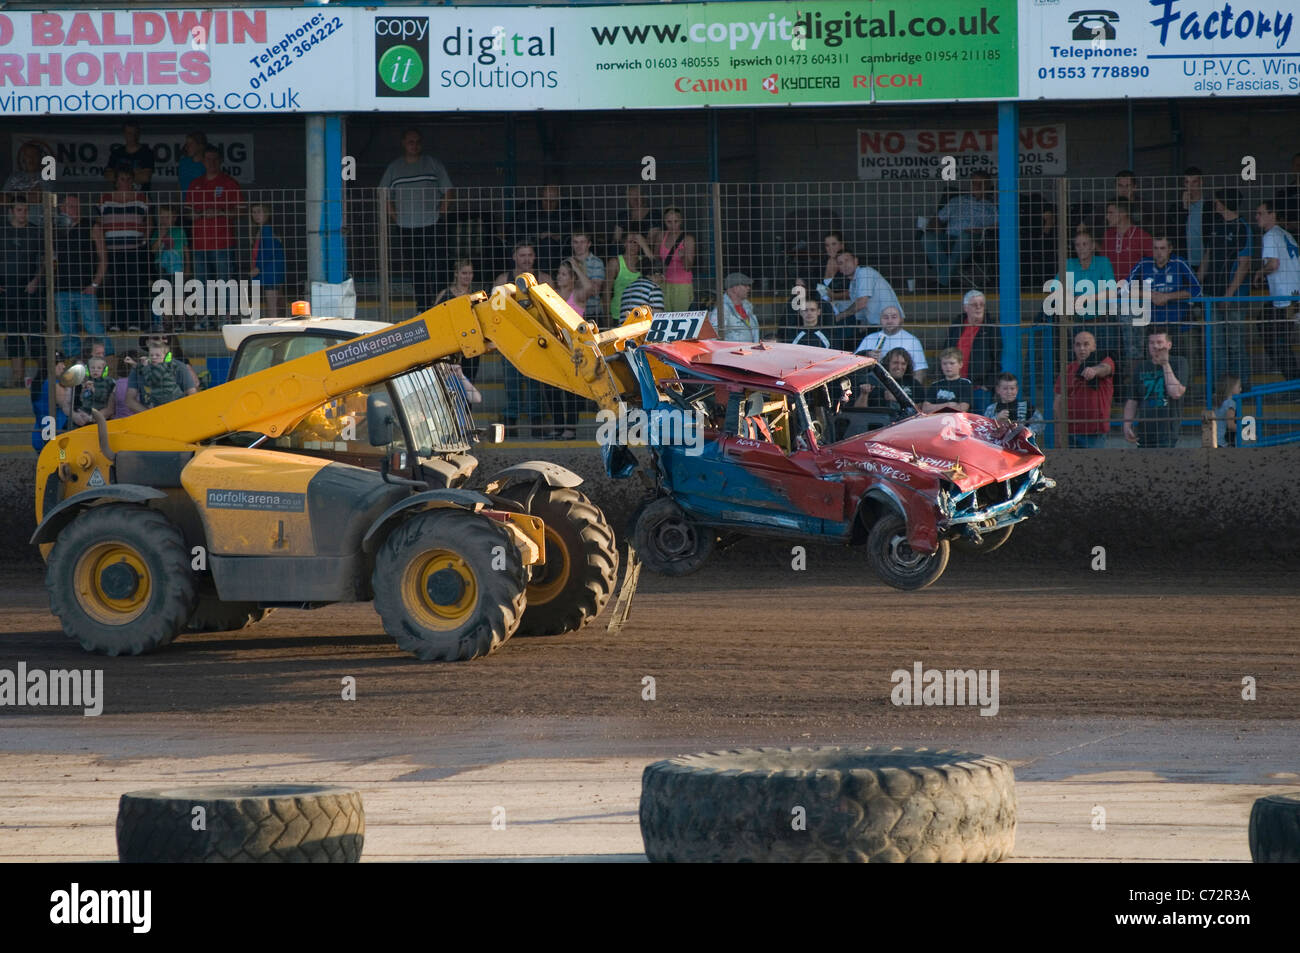 jcb lifting car of track after a banger race Stock Photo